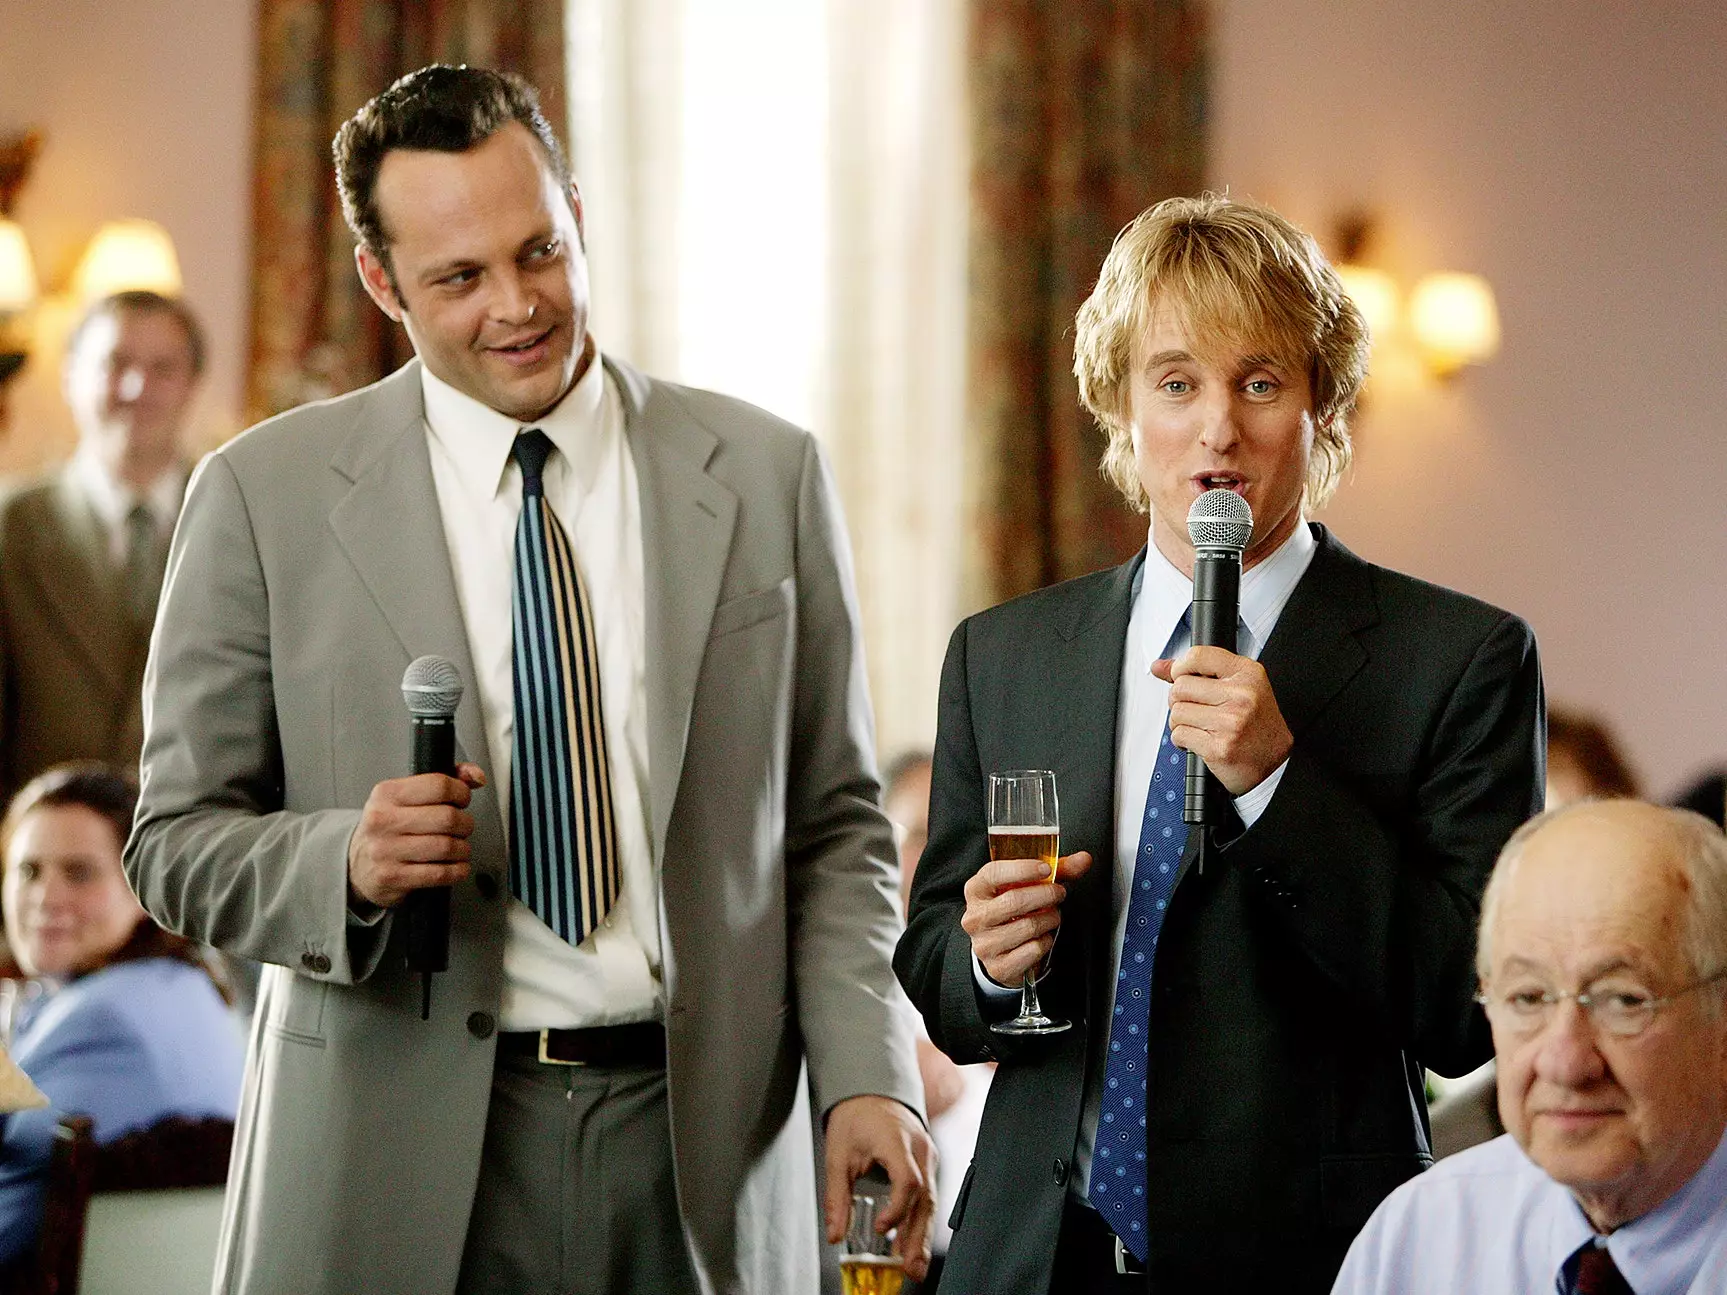 Wedding Crashers came out in 2005 (